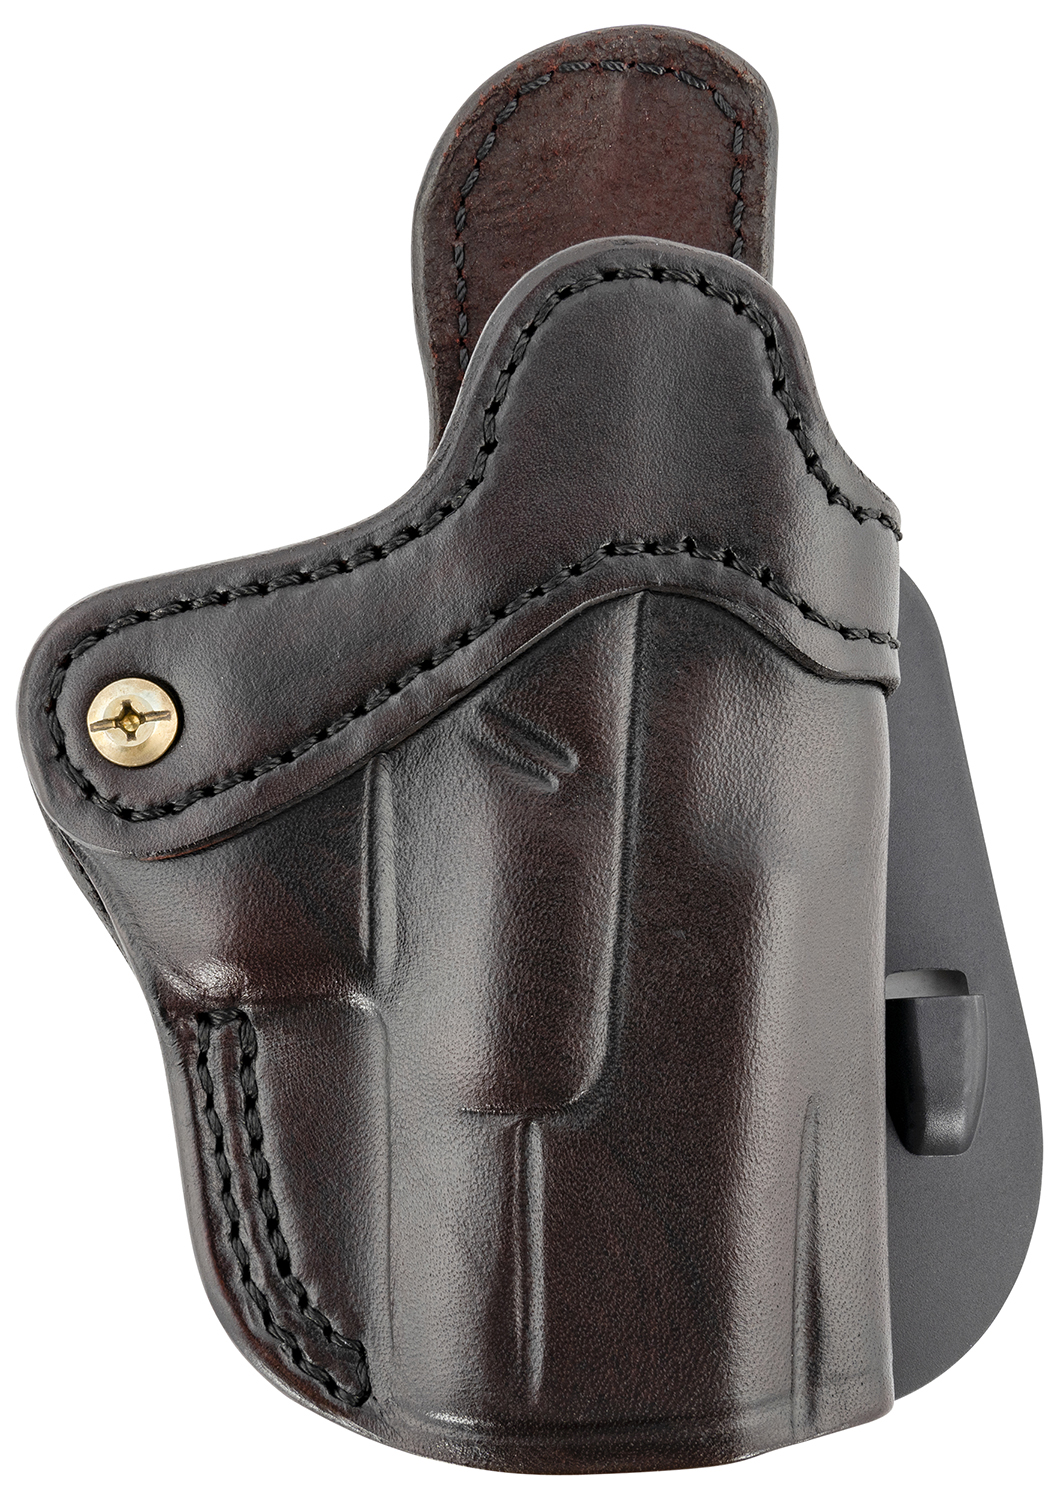 1791 Gunleather ORPDH21SBRR BH2.1 Optic Ready OWB Size 2.1 Signature Brown Leather Paddle Compatible w/Glock 17/Springfield XD/S&W Shield Right Hand